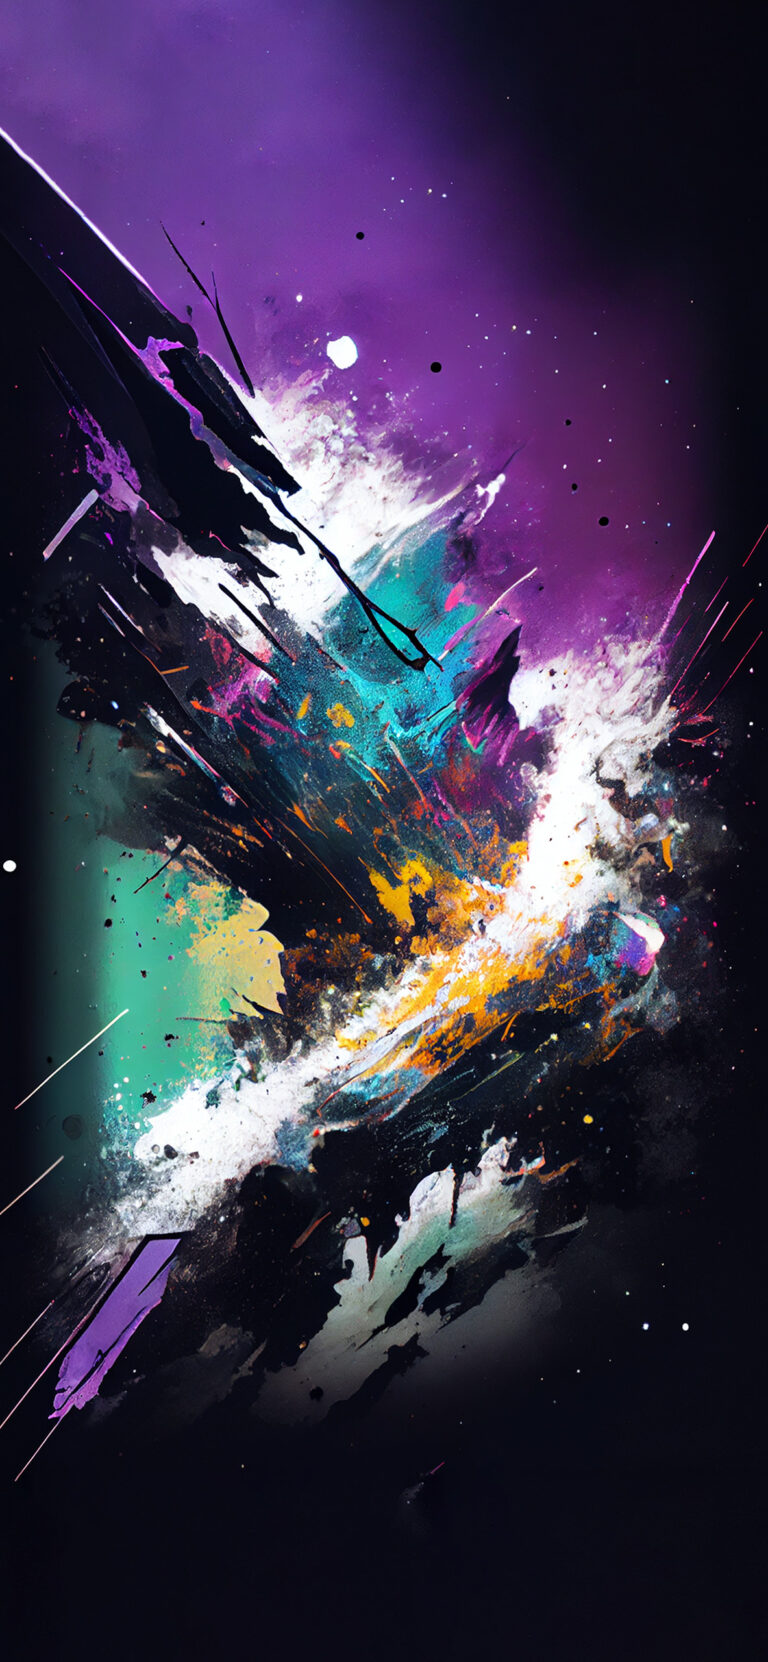 Art Abstract Wallpapers - Abstract Aesthetic Wallpapers for iPhone